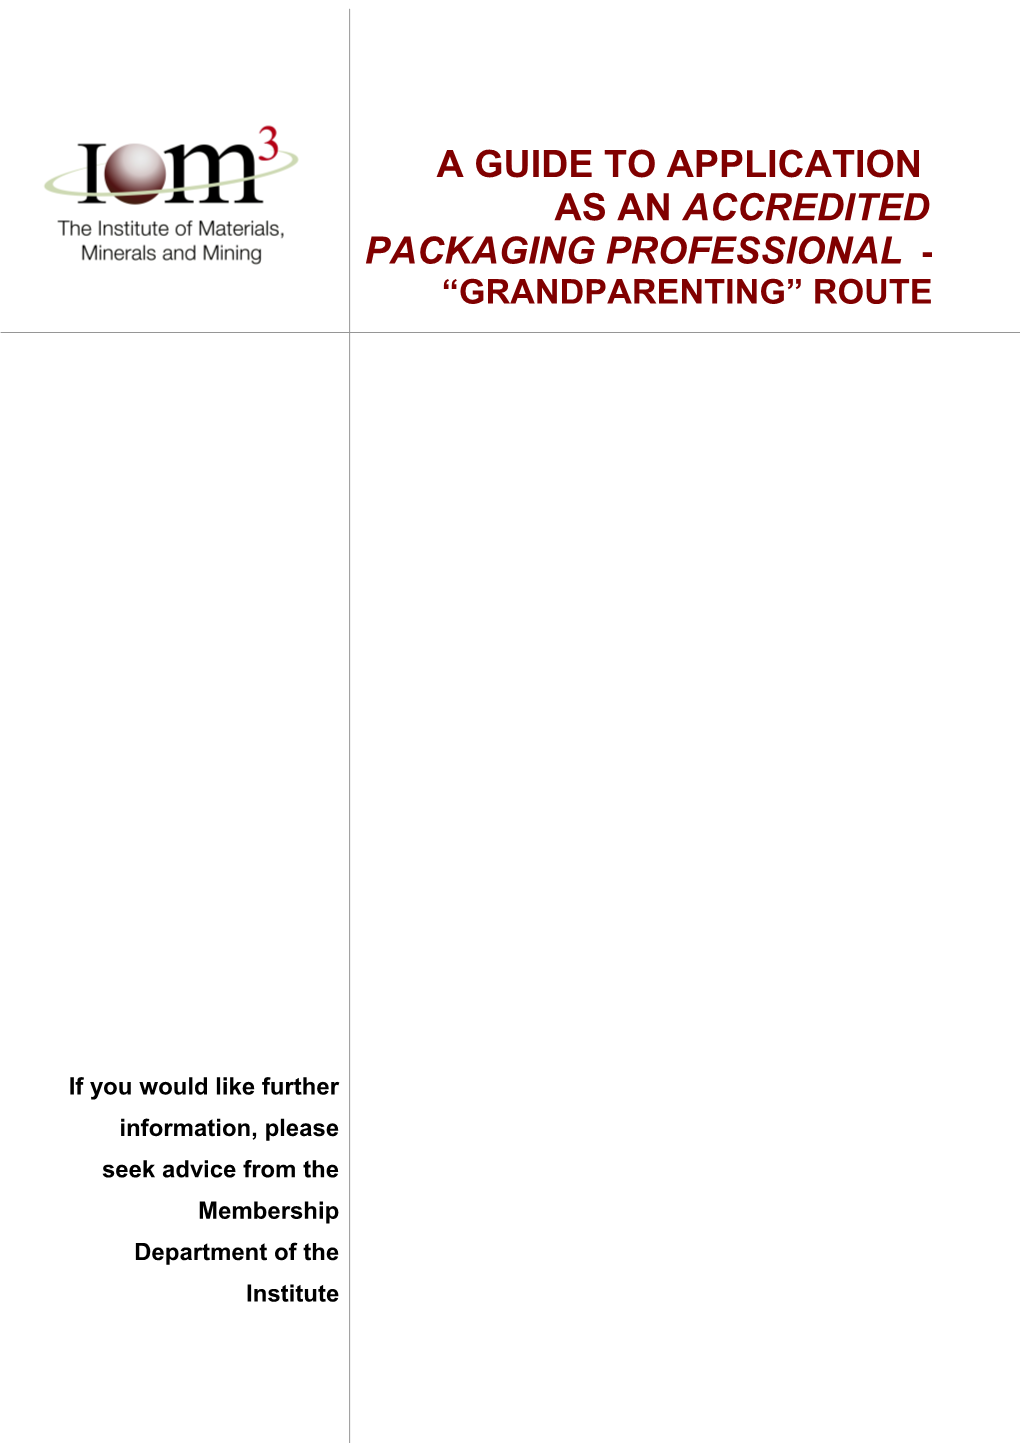 Accredited Packaging Professional a Guide to Application